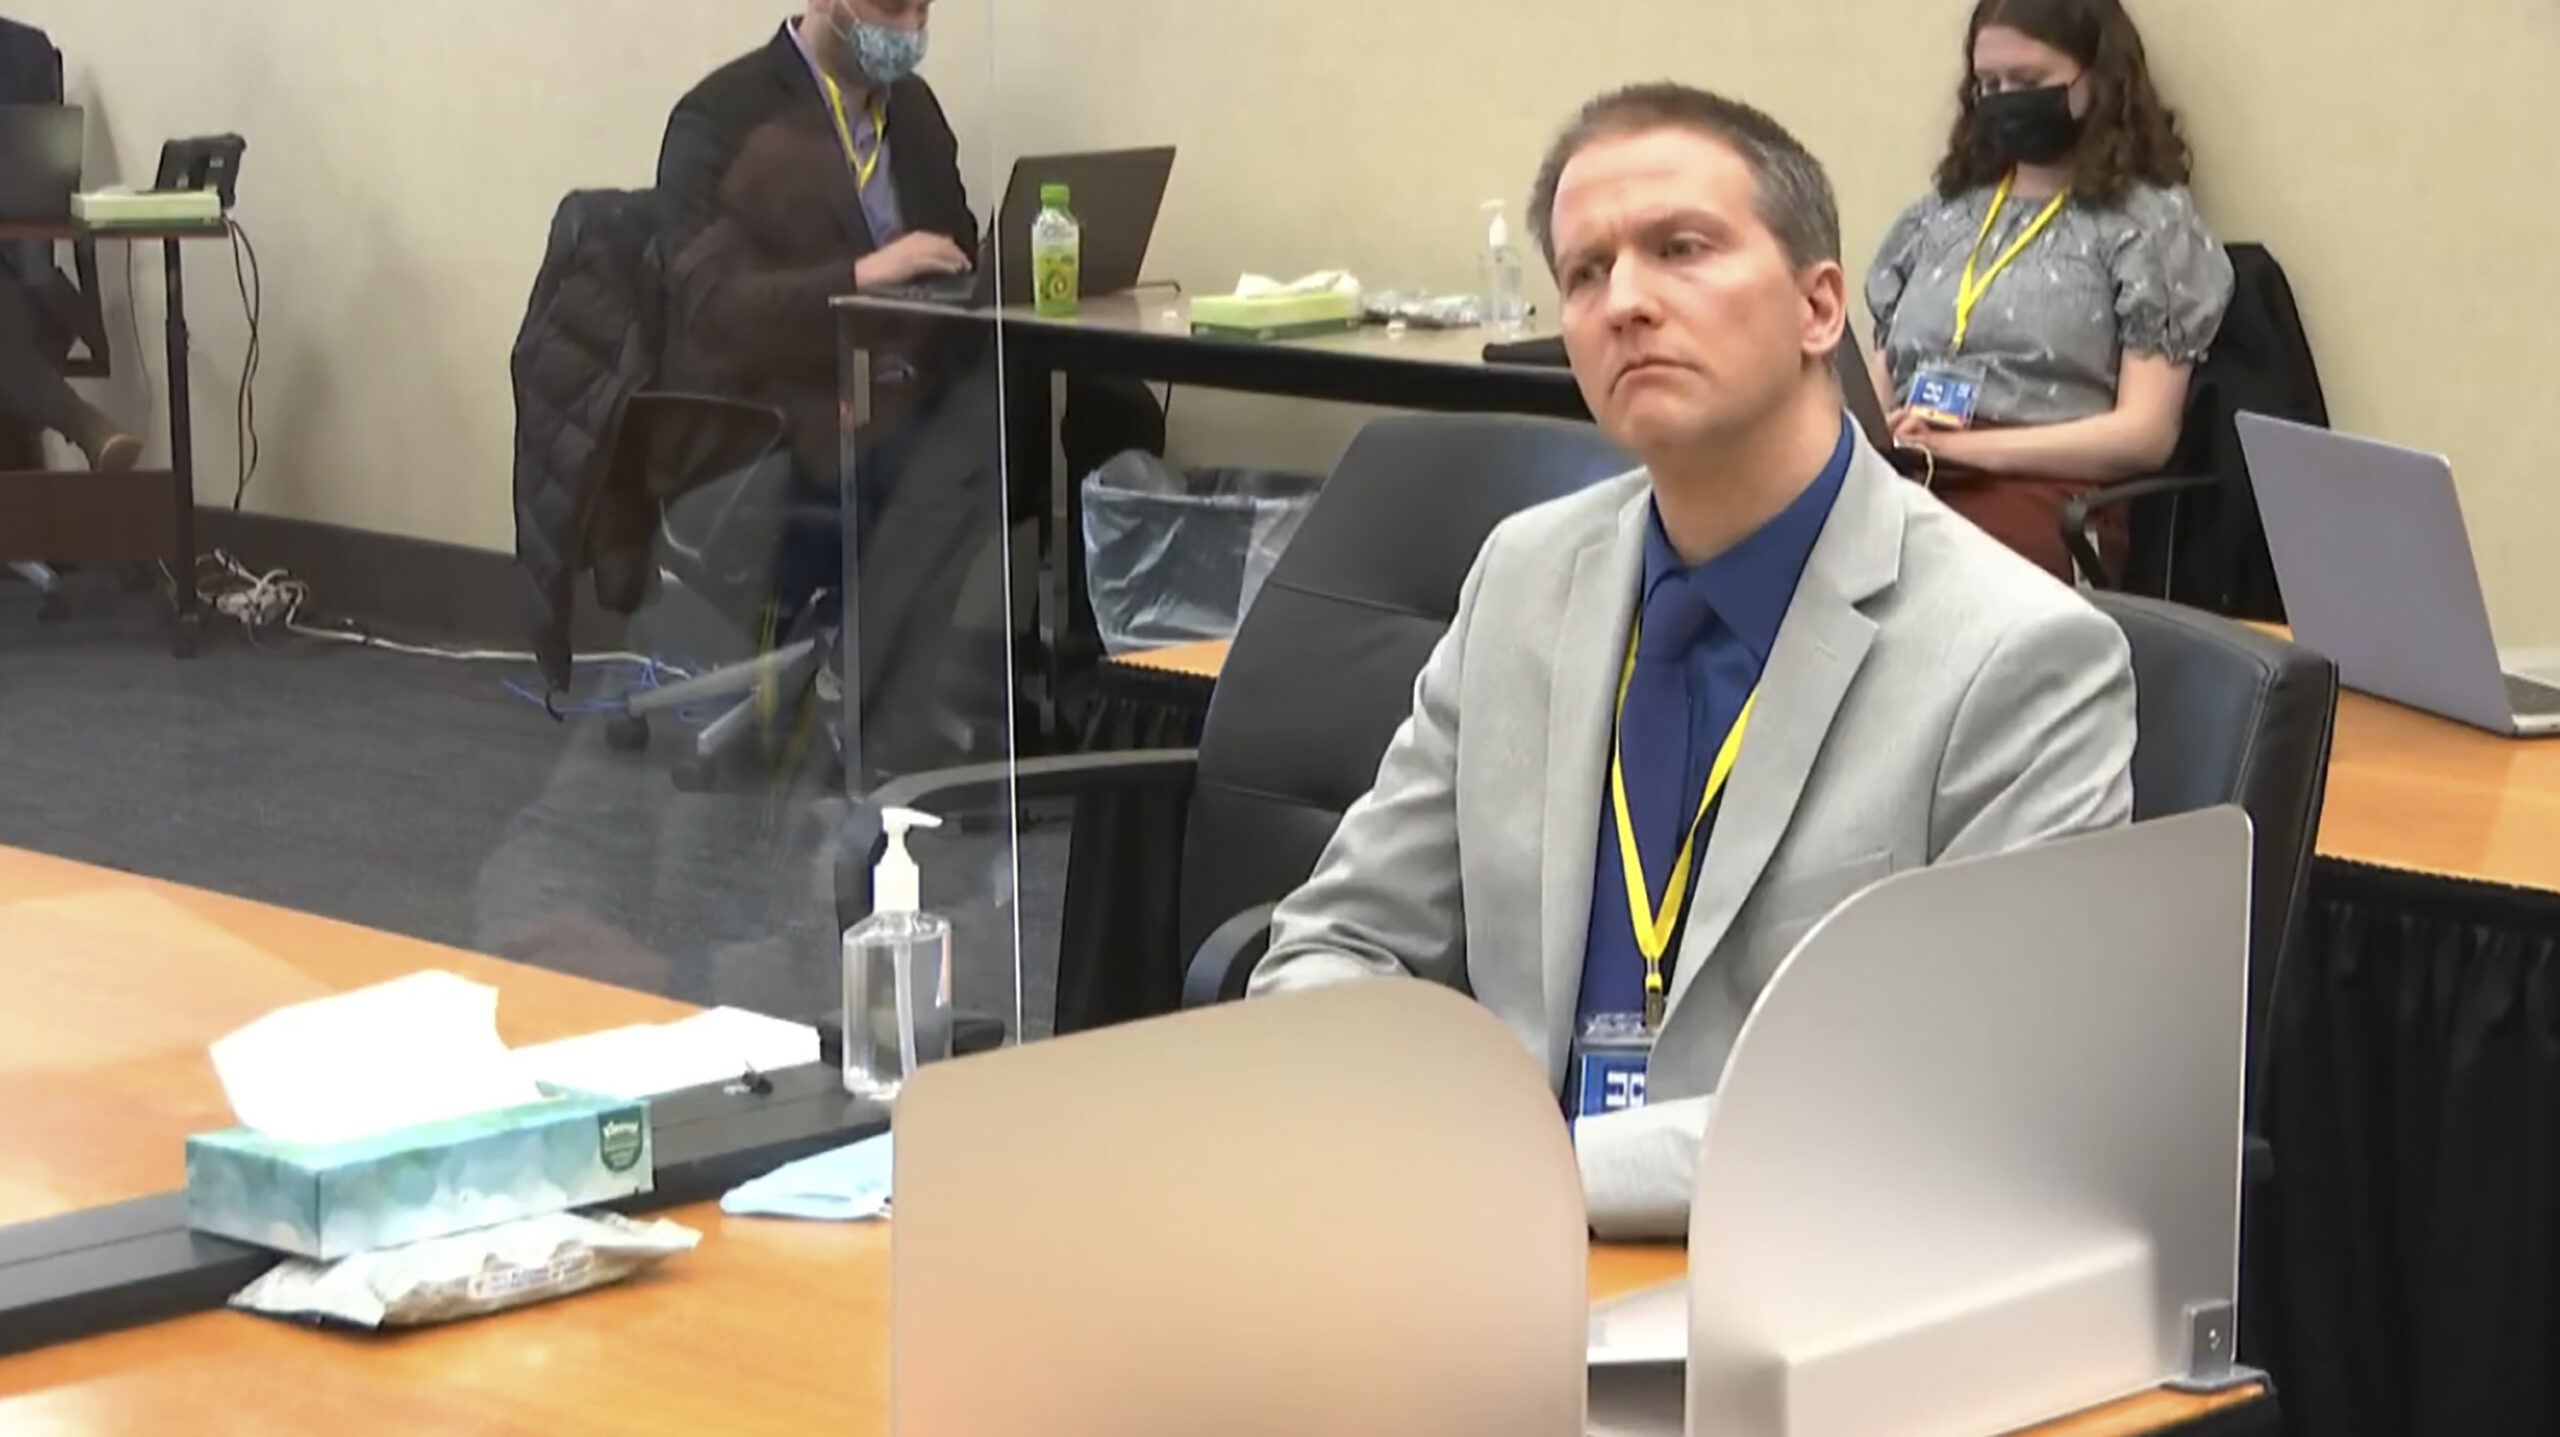 Derek Chauvin listens as attorney Eric Nelson gives closing arguments